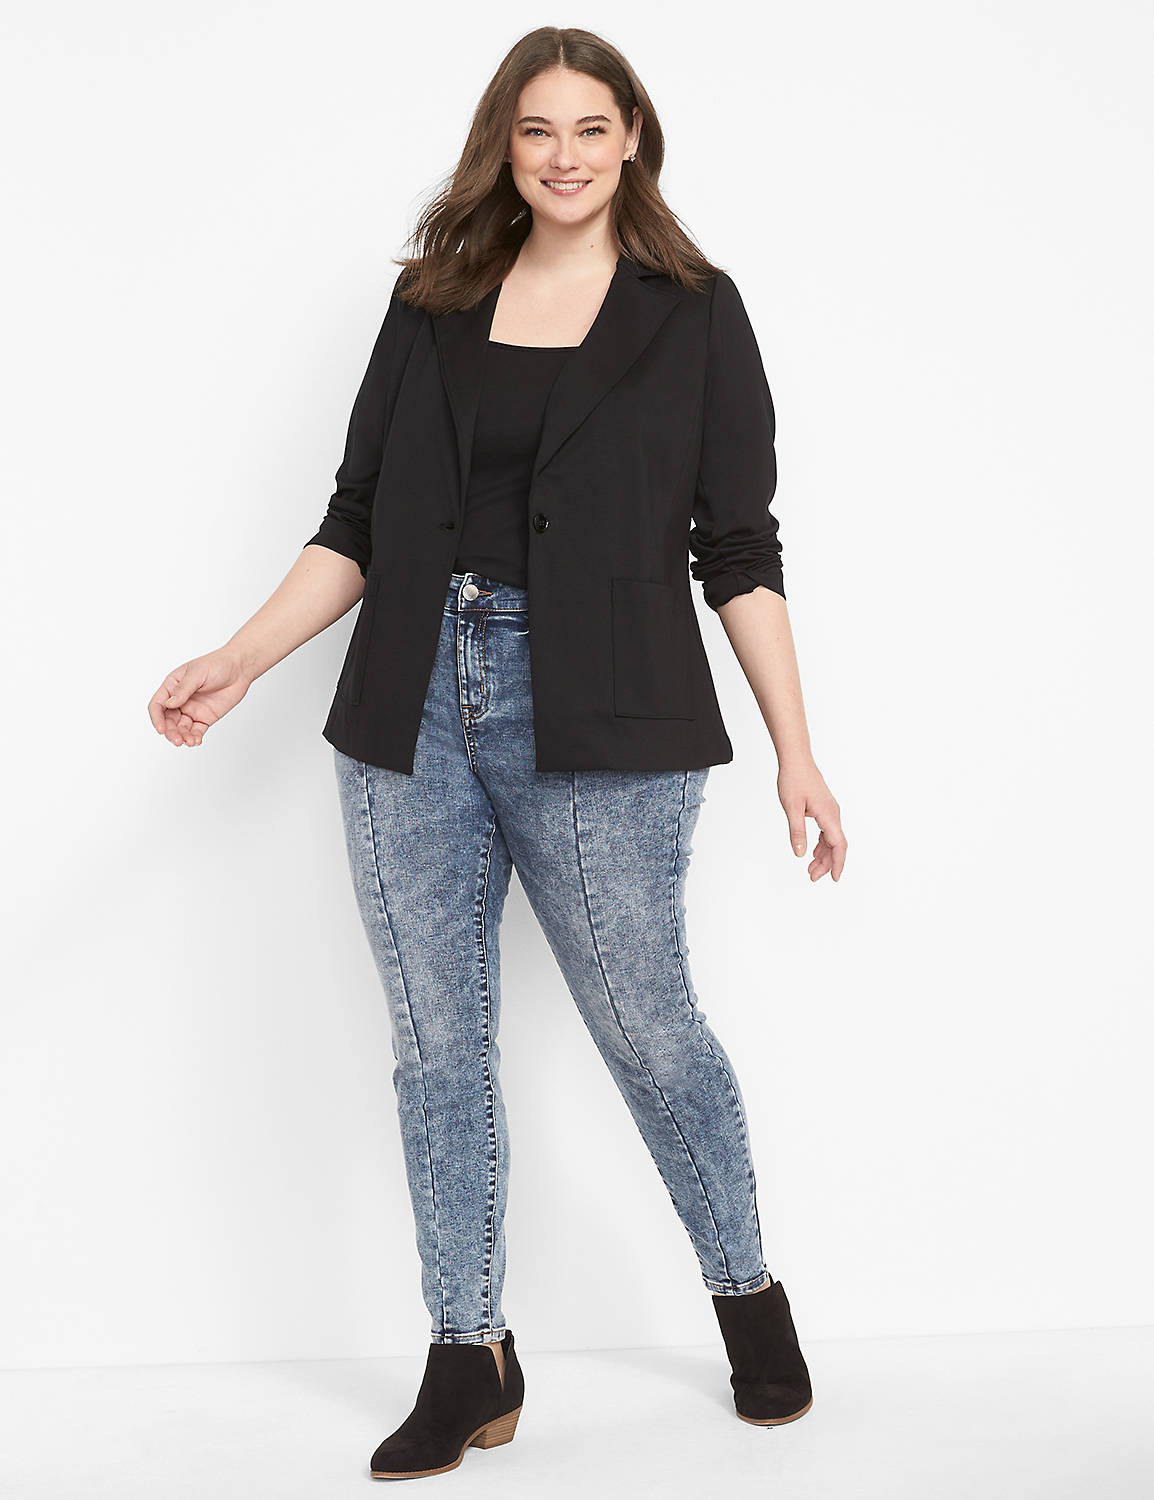 CURVY FIT HIGH RISE SKINNY - SUZANN Product Image 3